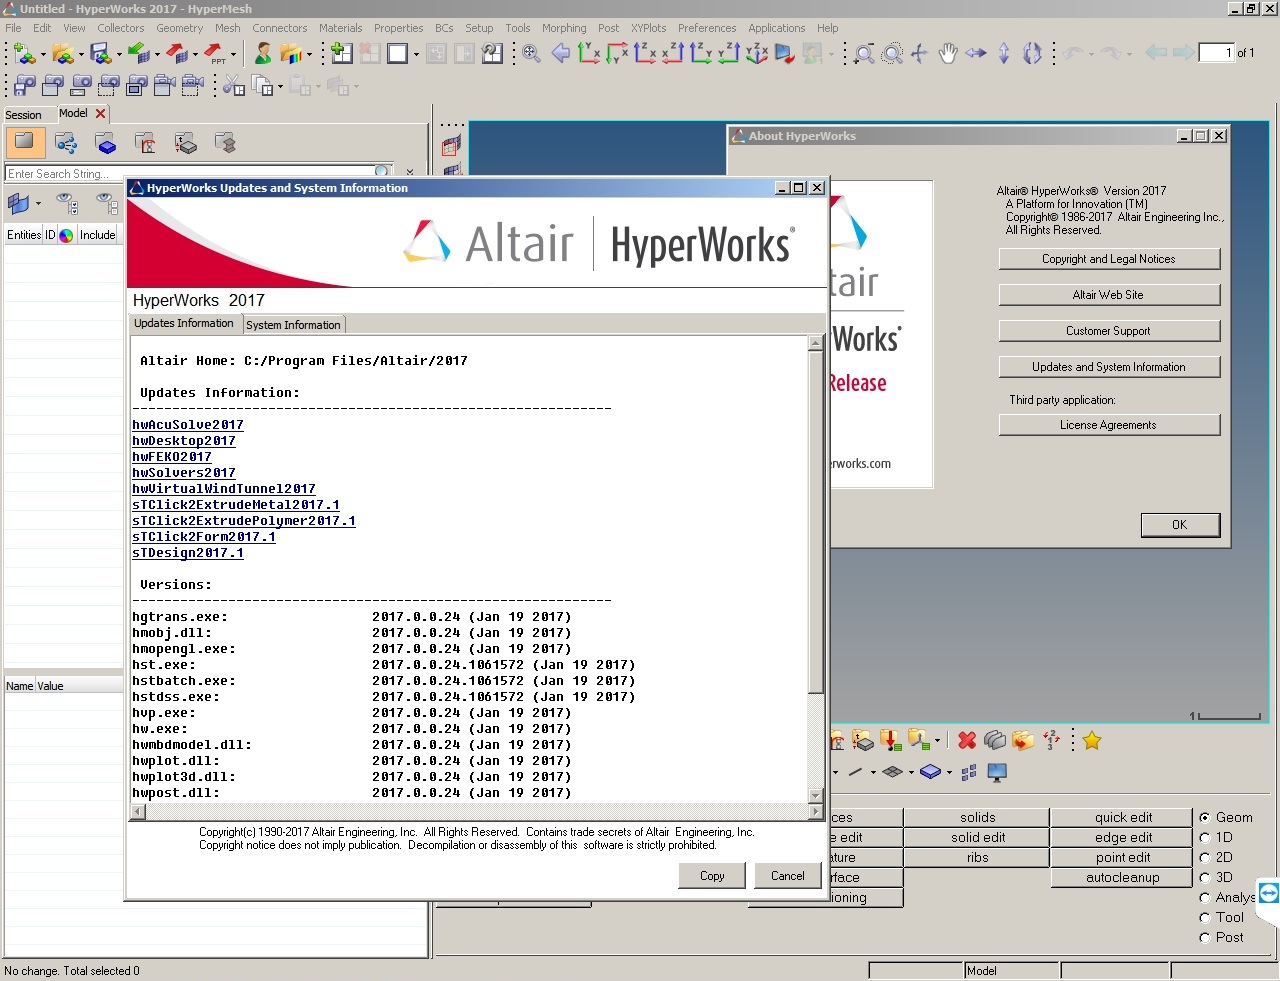 Working with Altair HyperWorks 2017.0.0.24 Suite full license